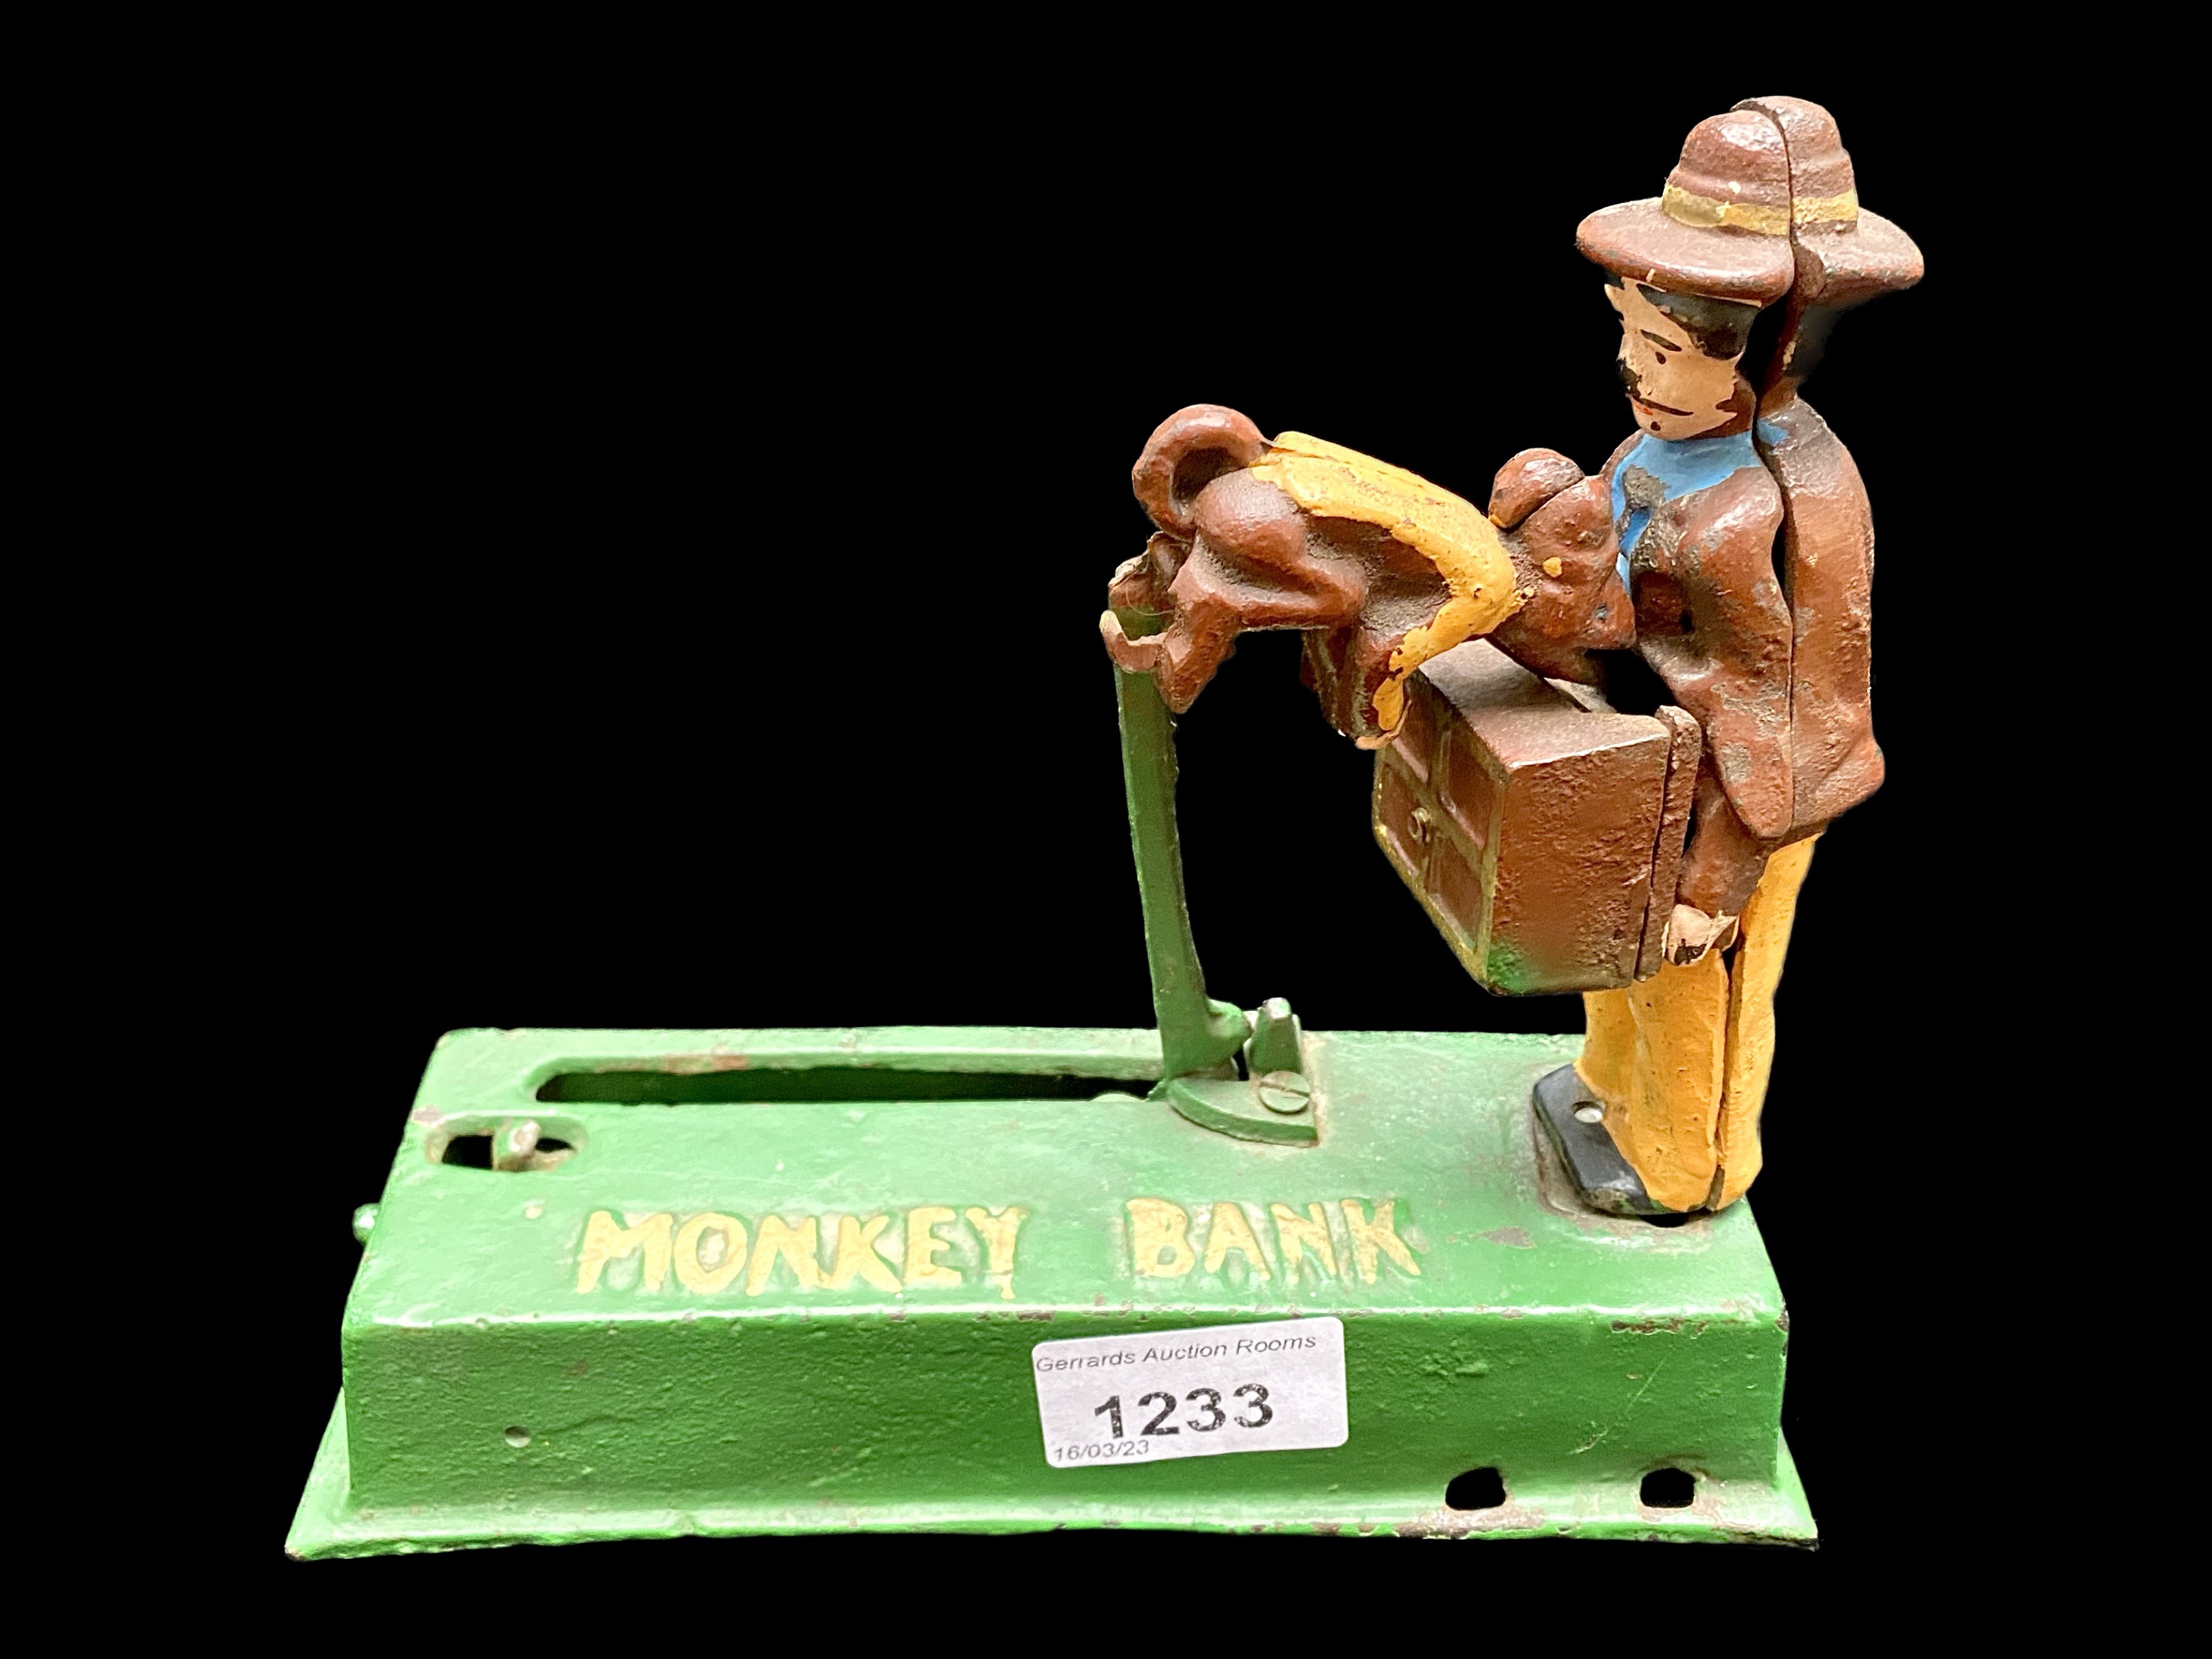 Metal Monkey Money Bank, reproduction bank with a monkey feeding a box held by a man.